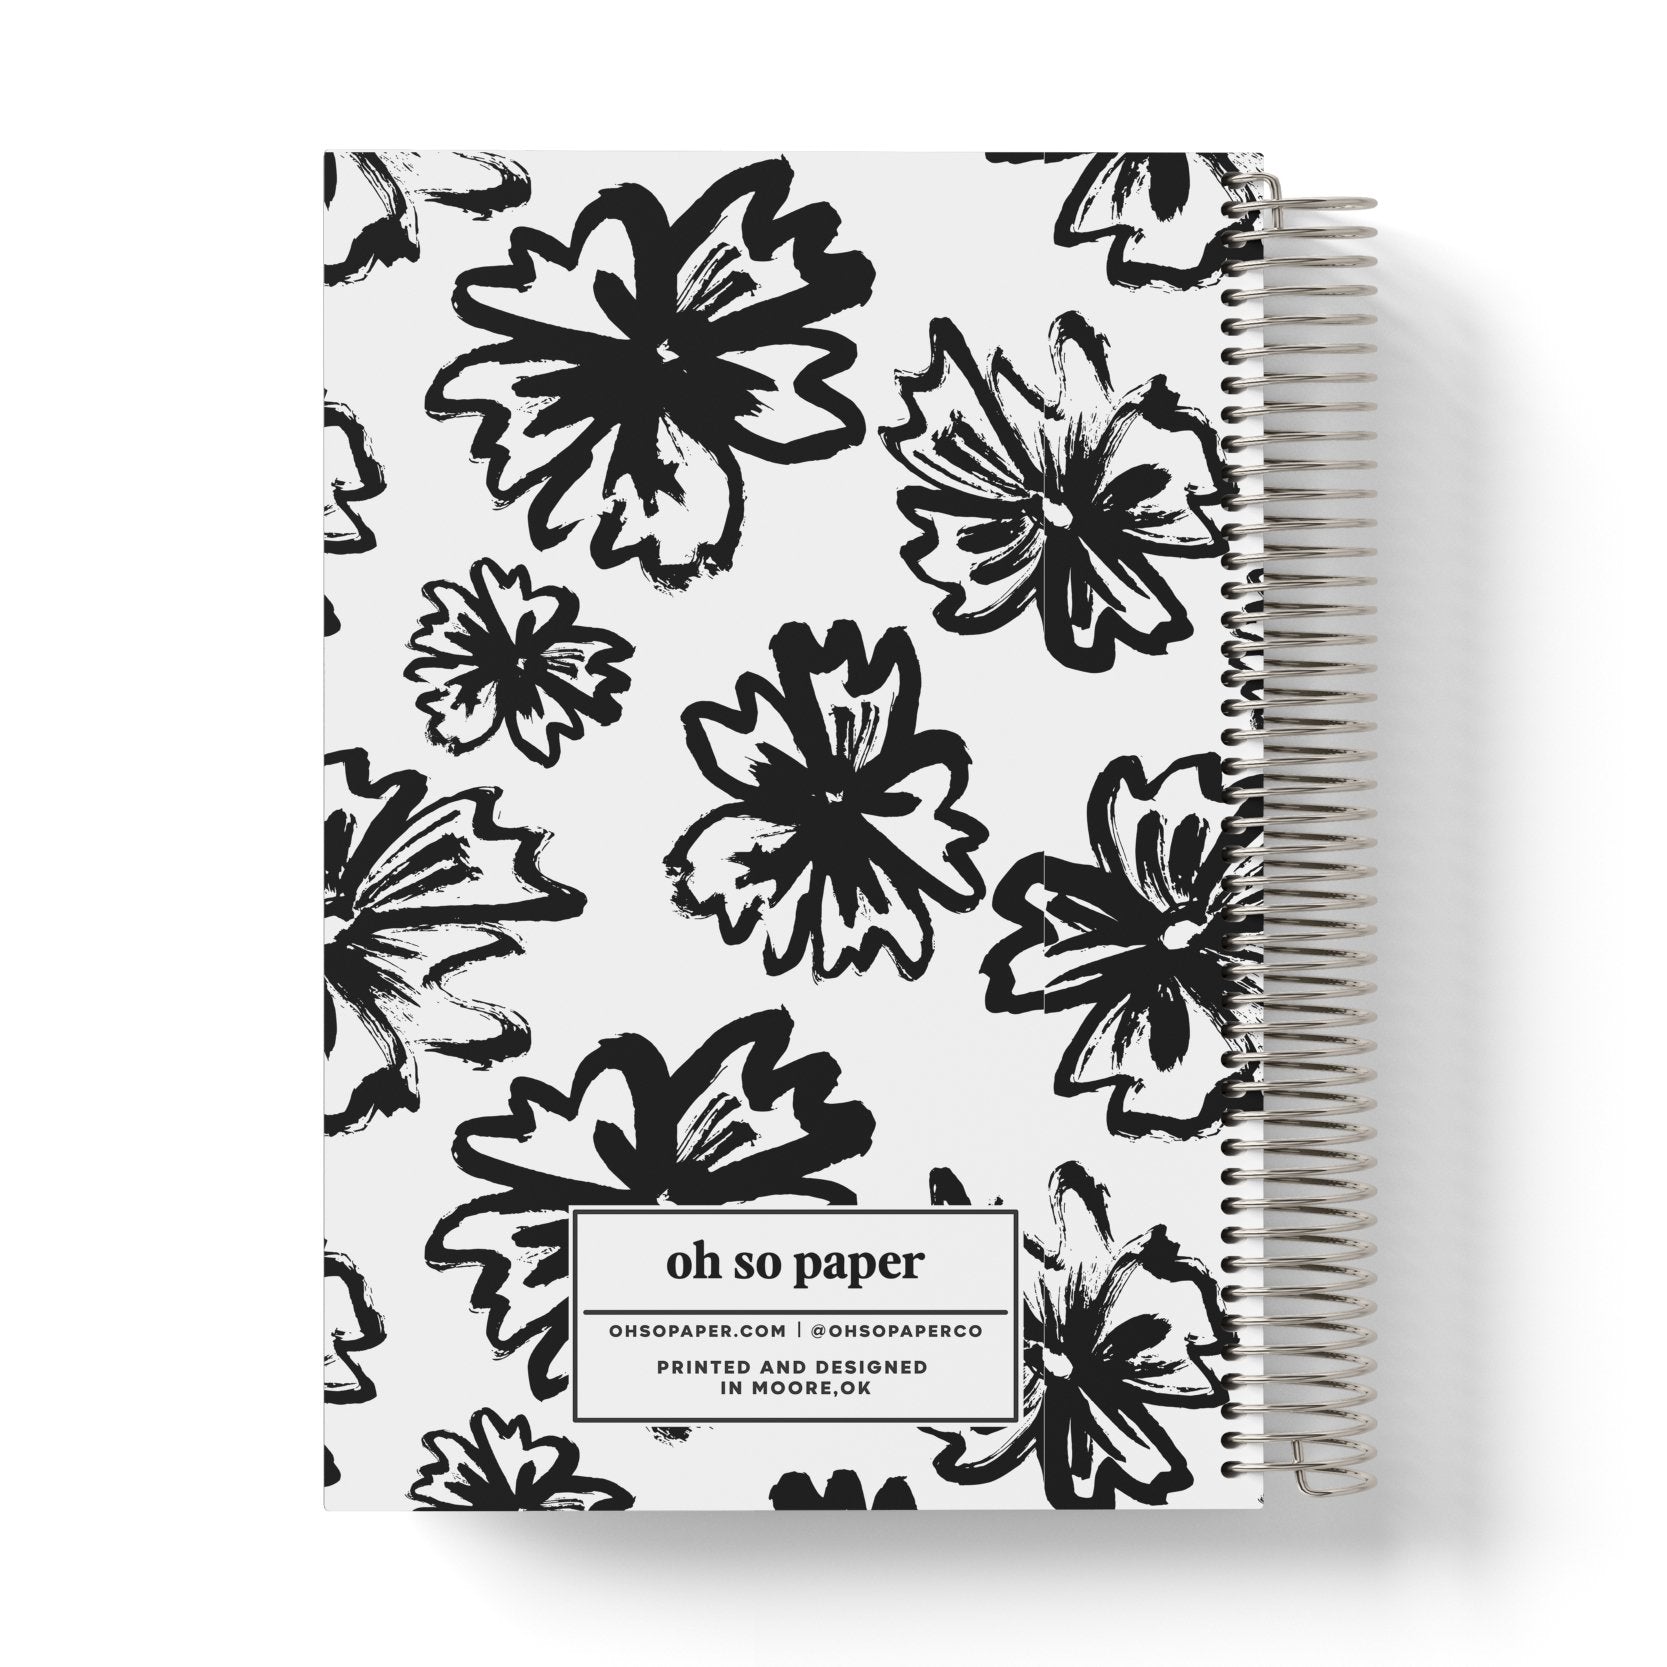 Make Today Count Notebook - ohsopaper